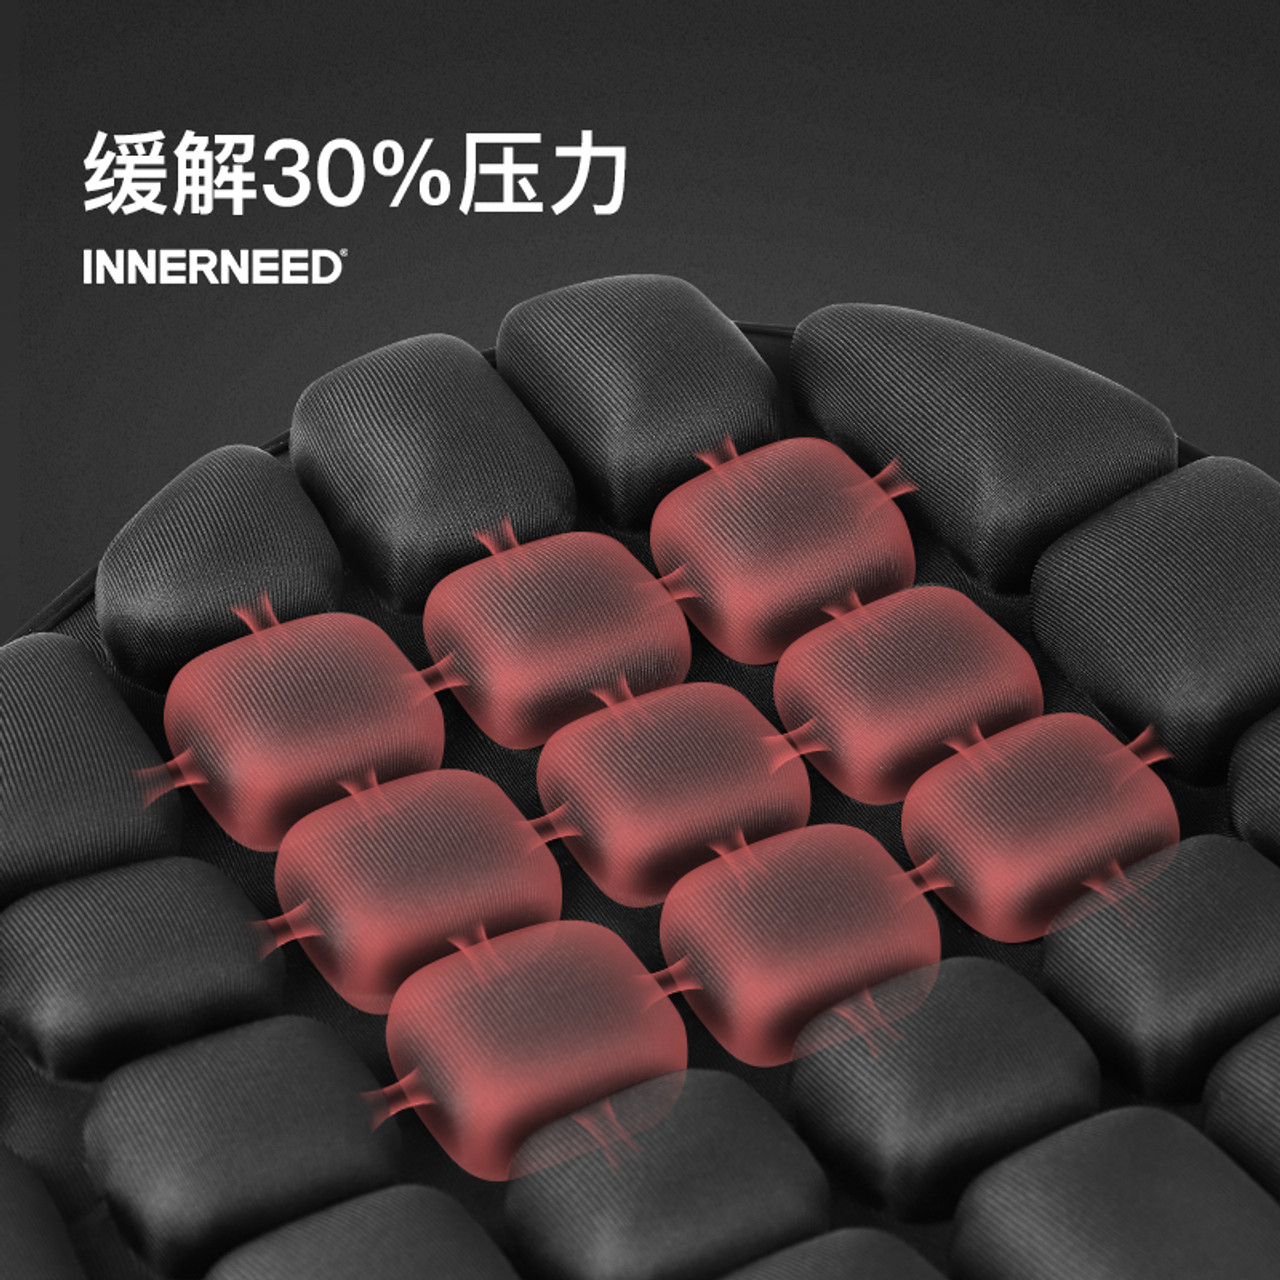 The Coolest Motorcycle Inflatable Air/Water 3D Seat Cushion